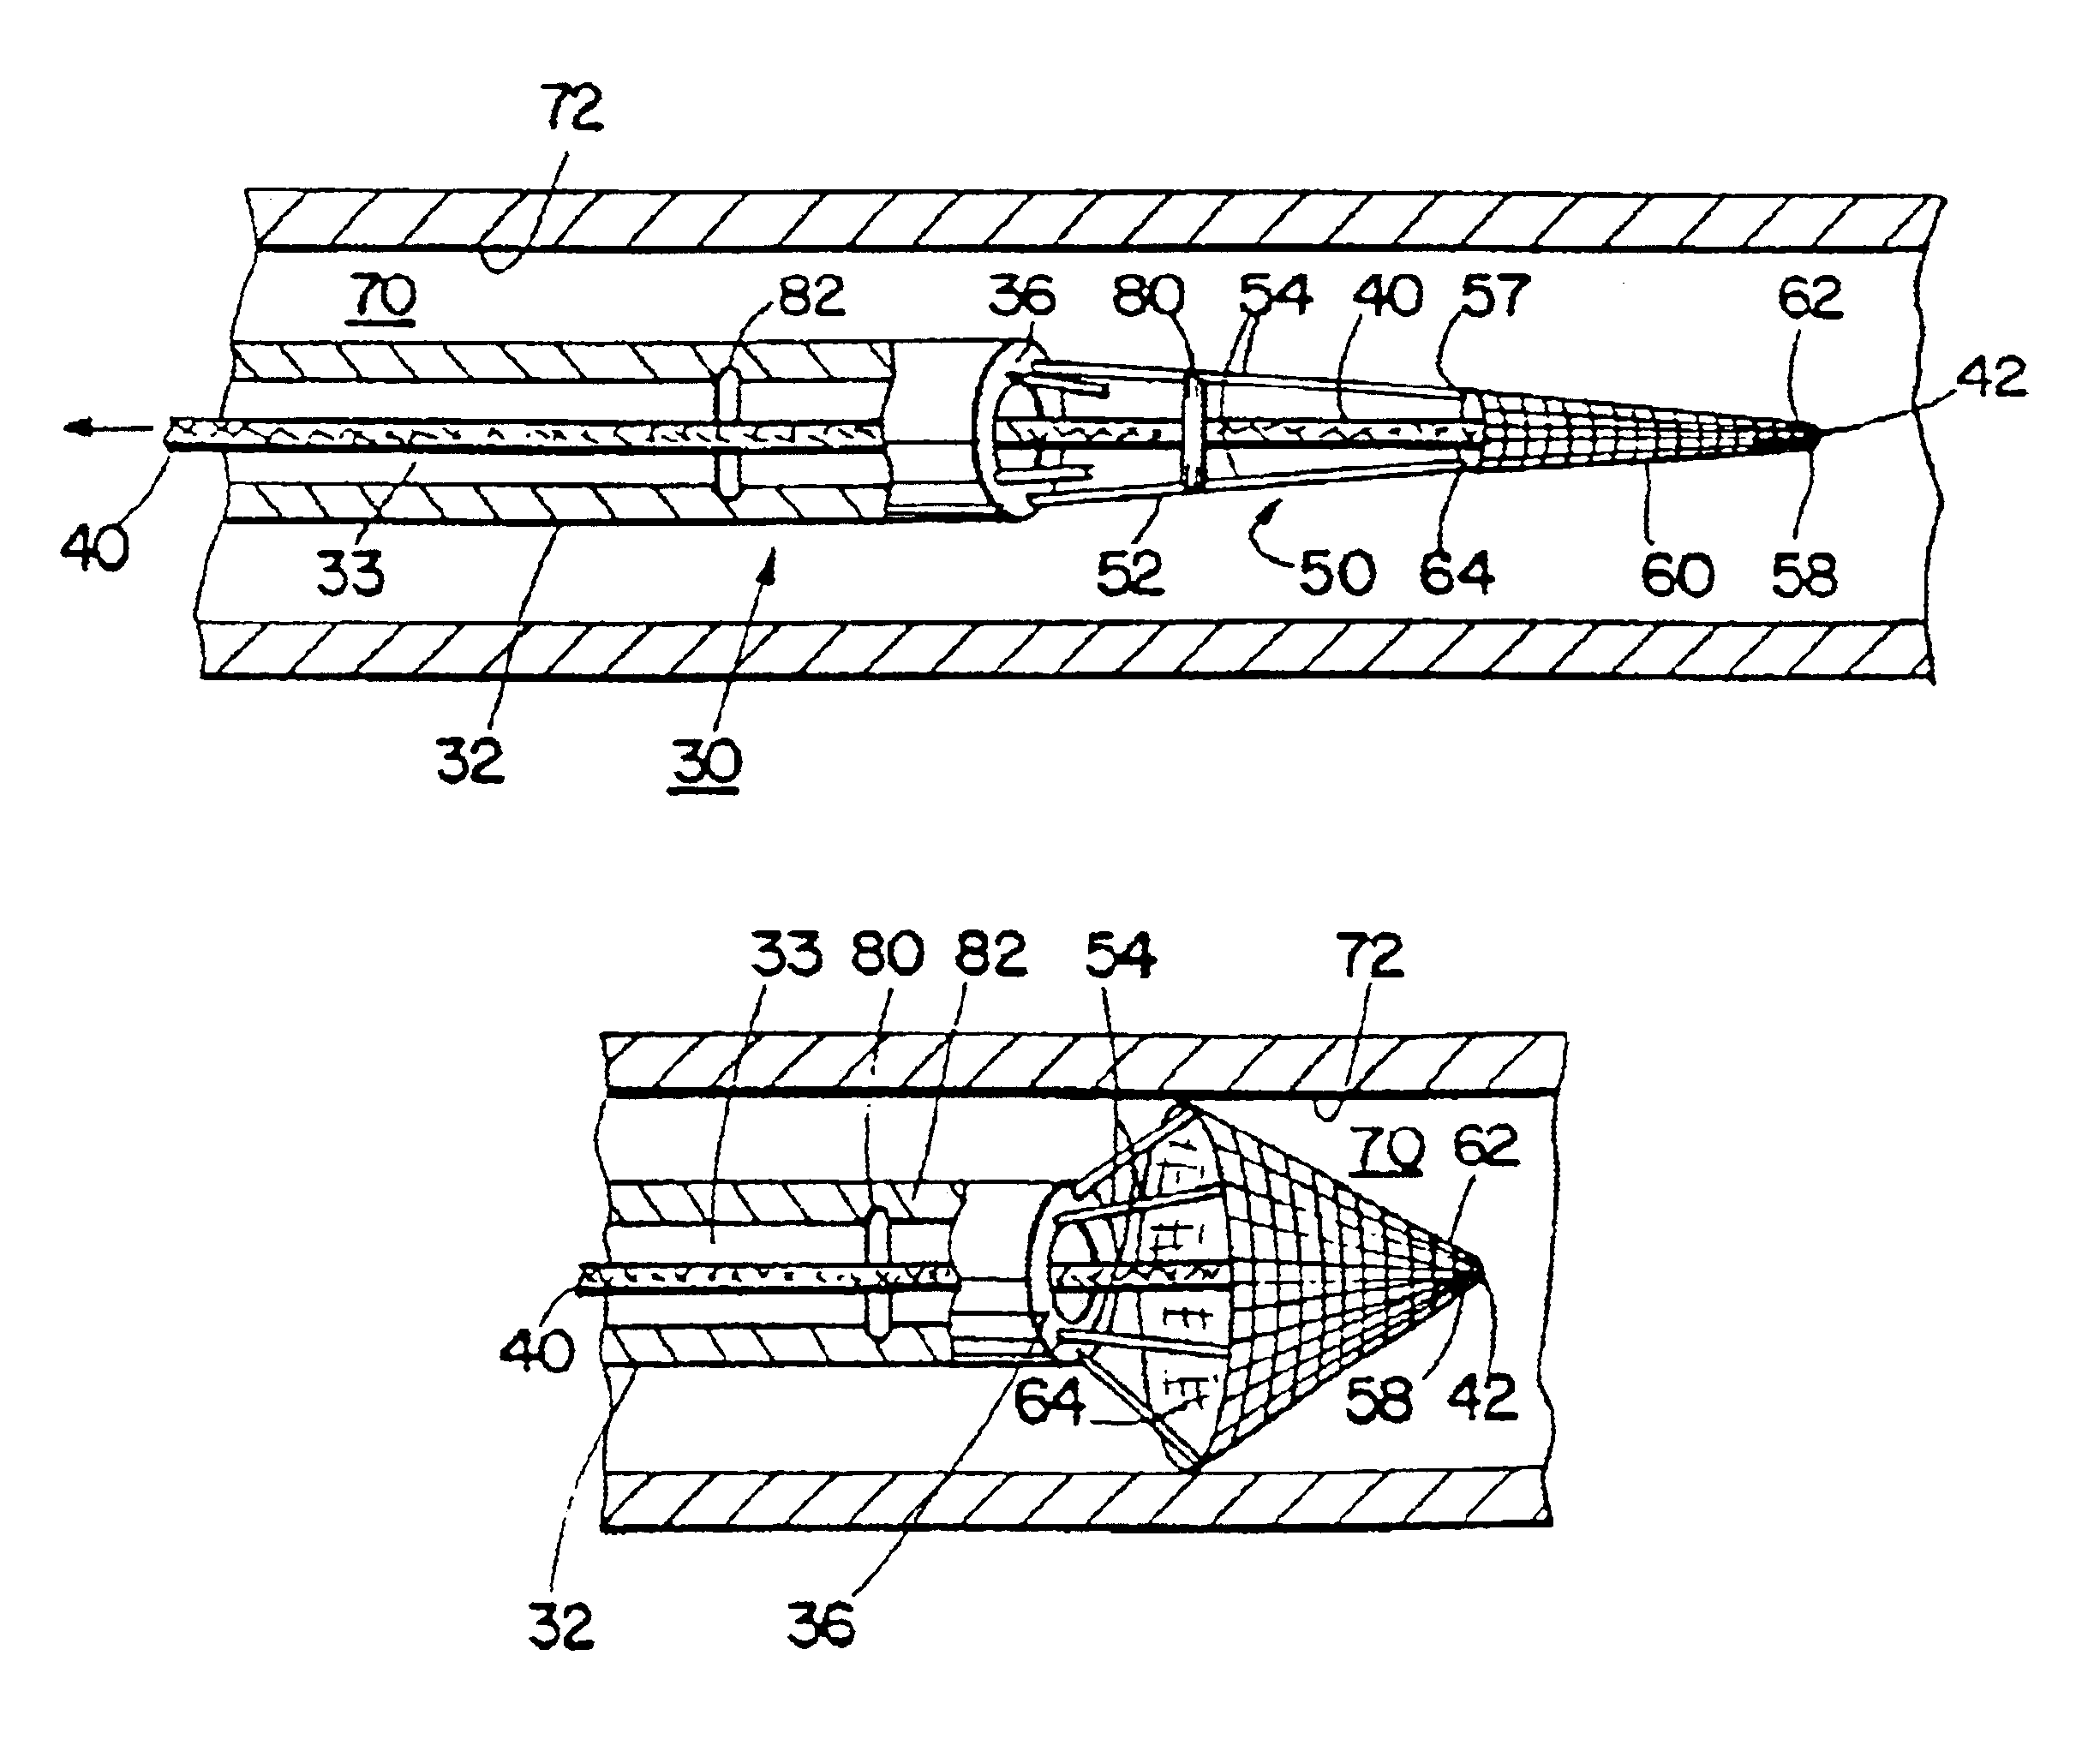 Percutaneous catheter and guidewire having filter and medical device deployment capabilities